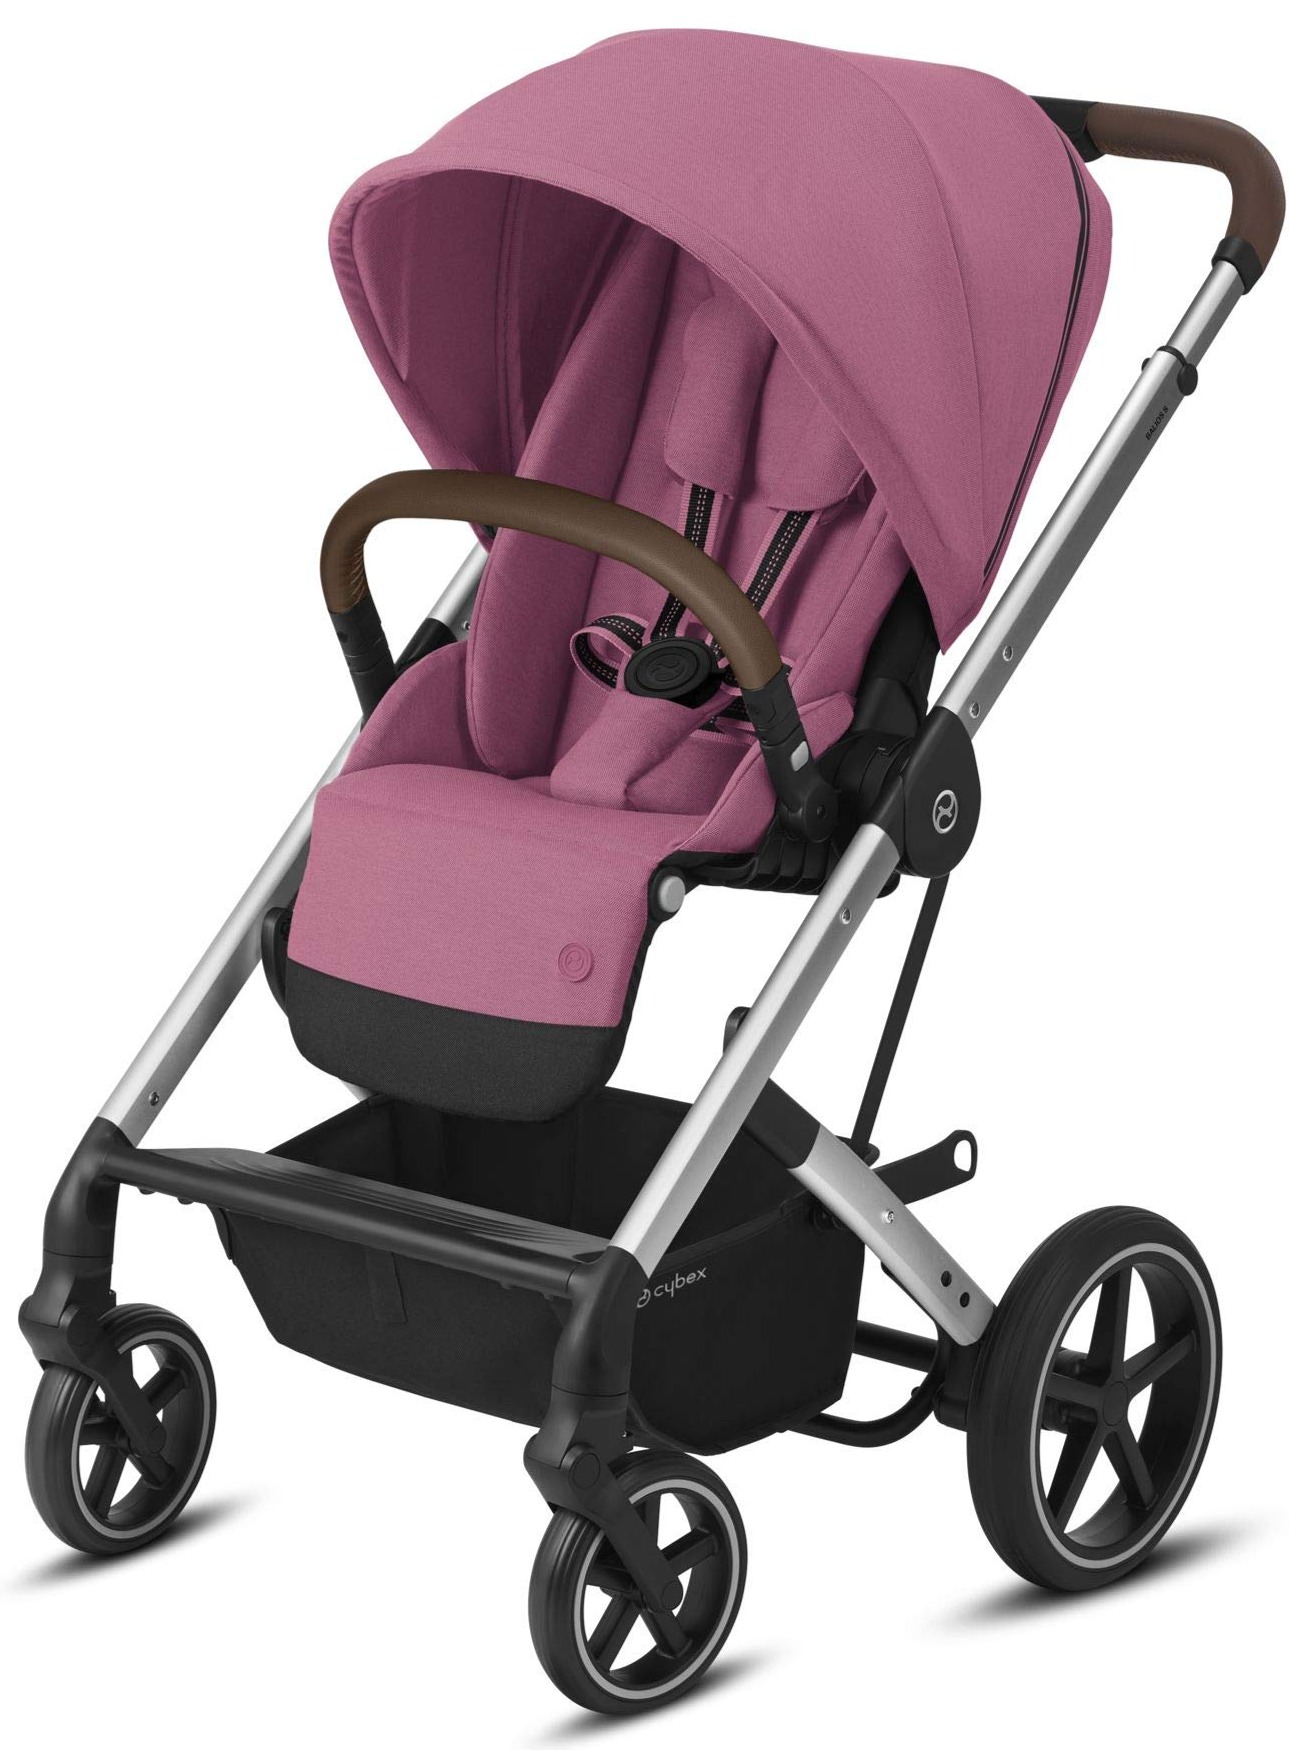 Cybex Balios S Lux Stroller FrontFacing or ParentFacing Seat Positions OneHand Fold Multiposition Recline Adjustable Leatherette Handlebar Infant Stroller, Magnolia Pink $359.99